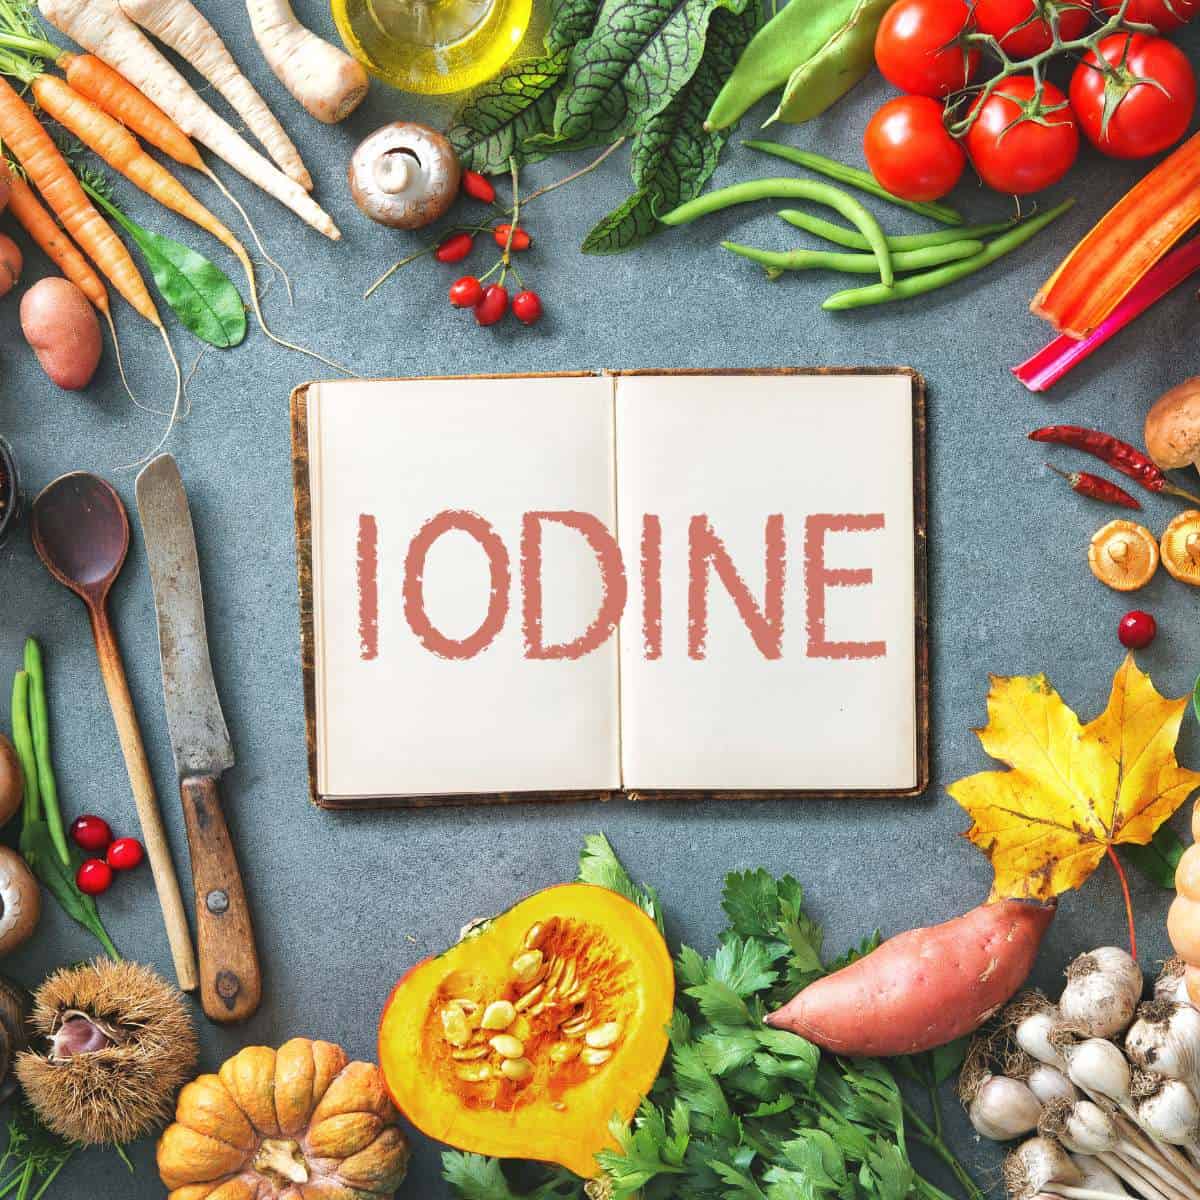 Platter of plant based foods with a chalkboard in the center with the word "IODINE" handwritten on it.